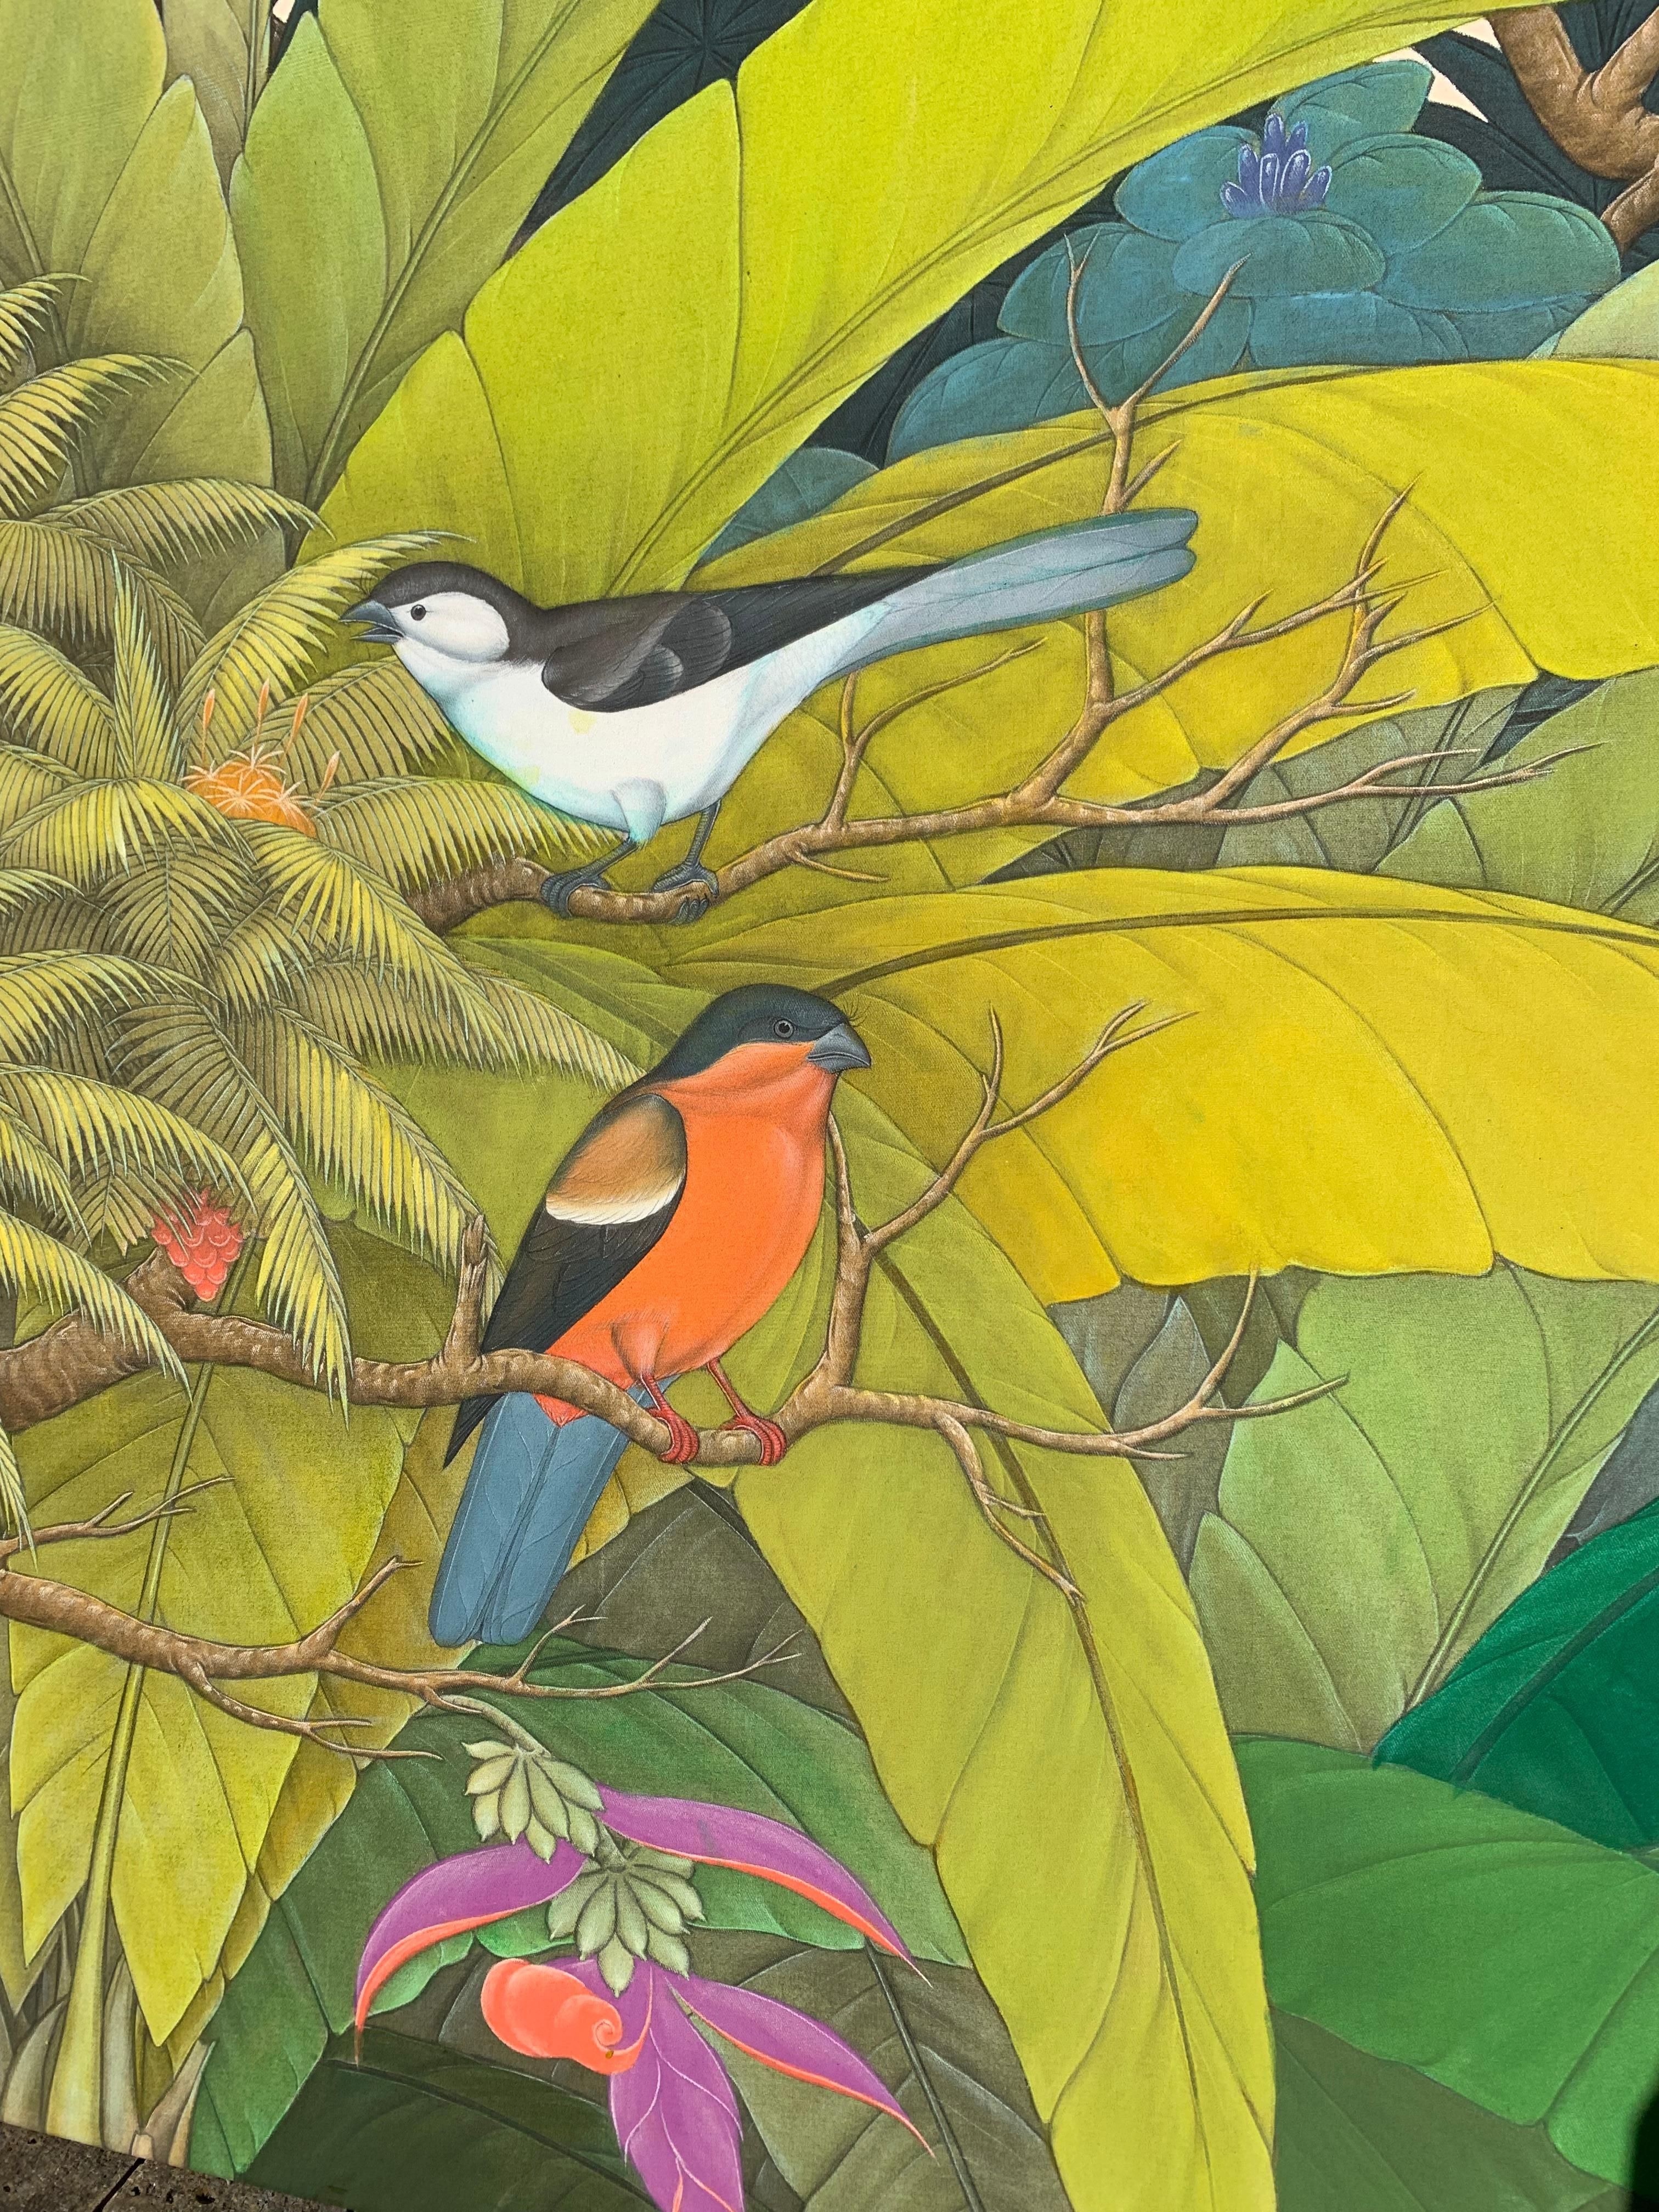 Song of Friendship' is an original beautiful  contemporary painting full of color and movement.

Katharina Husslein has started a new body of work looking at rainforests and jungles. These beautiful parts of nature are currently under threat